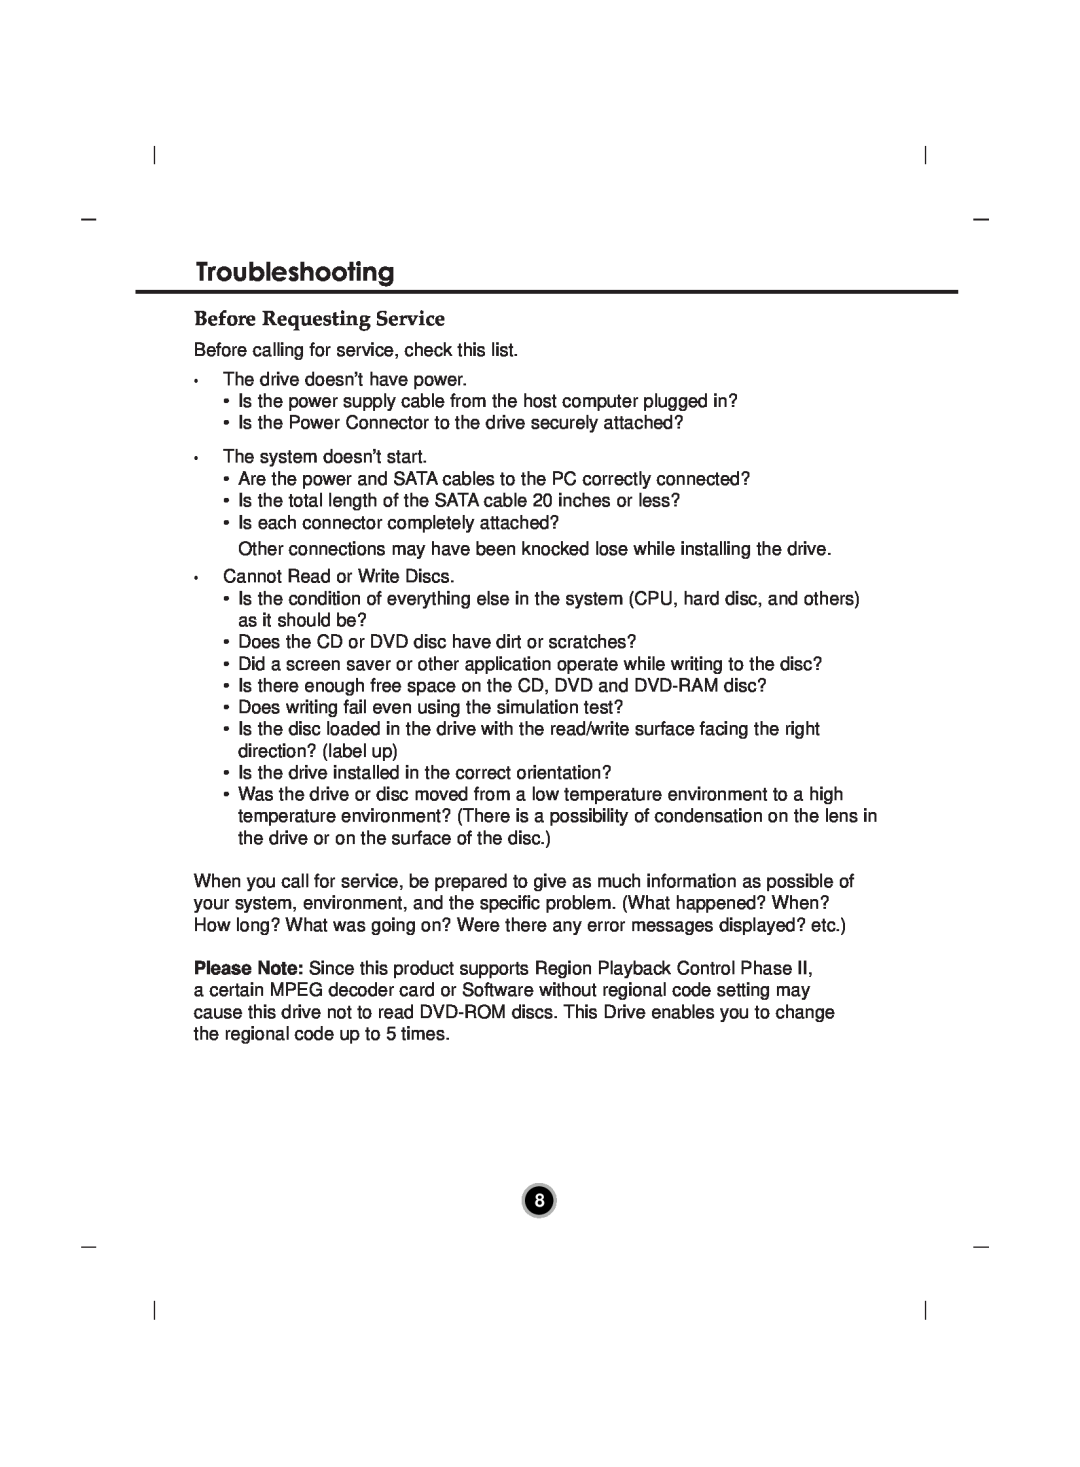 LG Electronics GH22 manual Troubleshooting, Before Requesting Service 